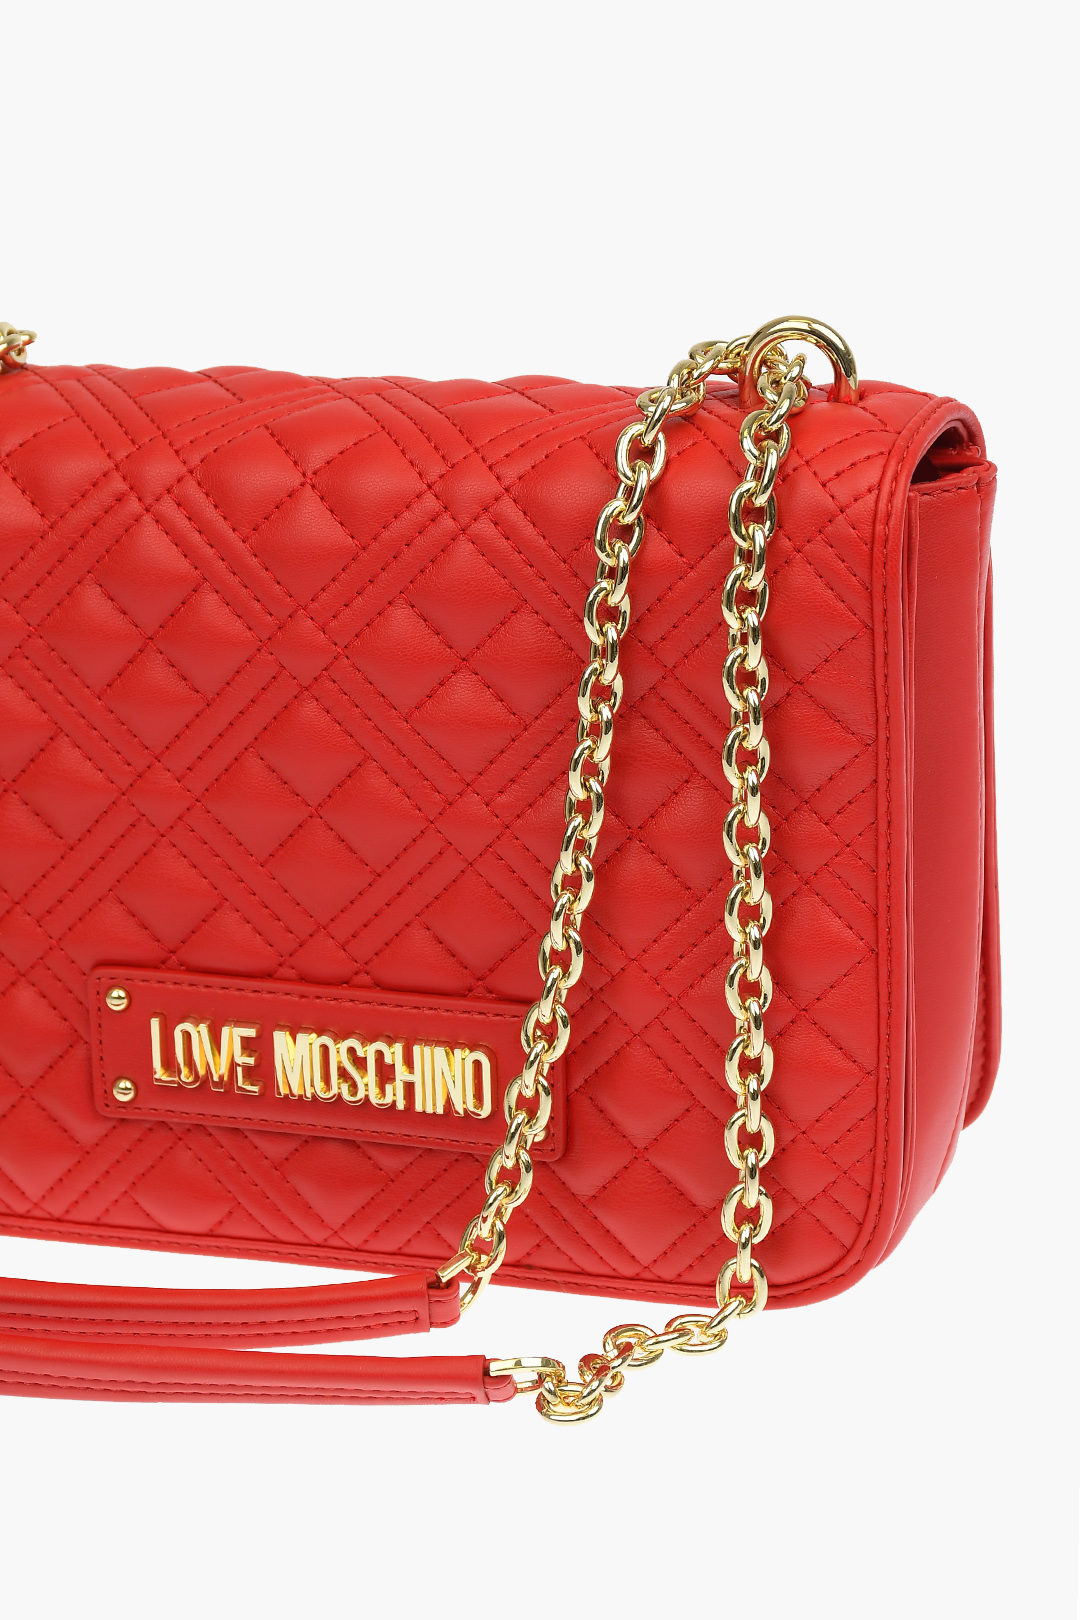 LOVE Moschino Womens Shiny Quilted Handbag with Chain Strap 